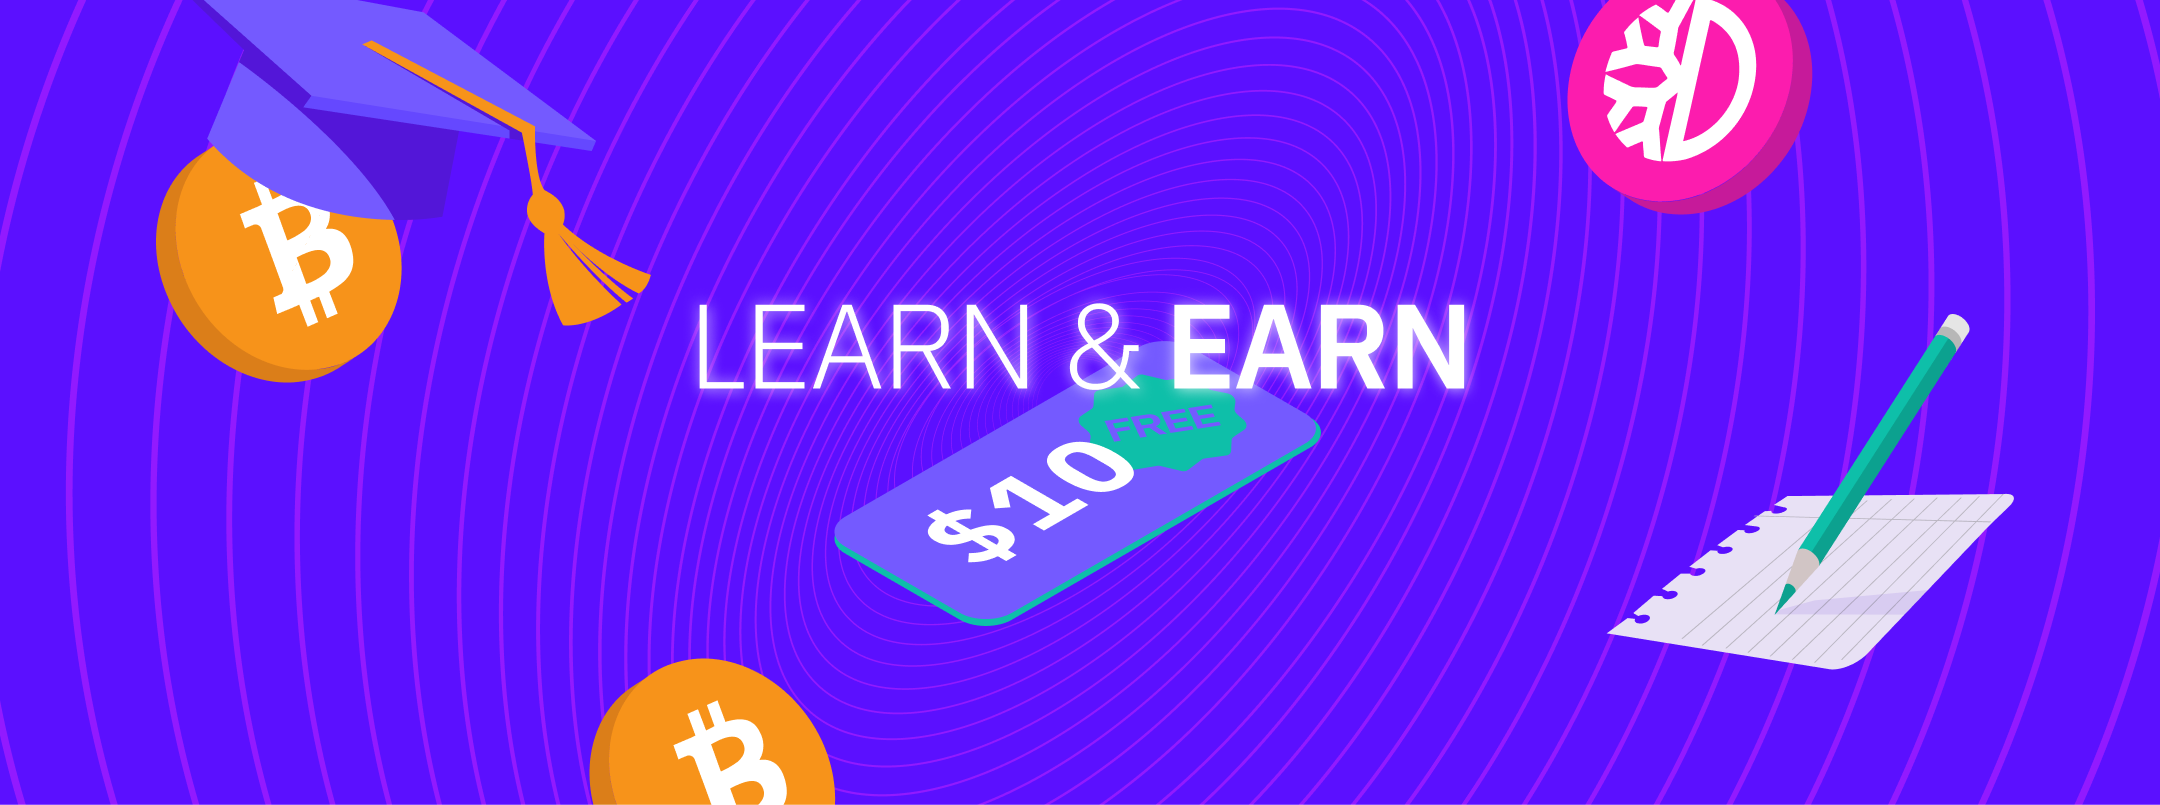 Learn About Crypto & Earn $10 in Crypto!